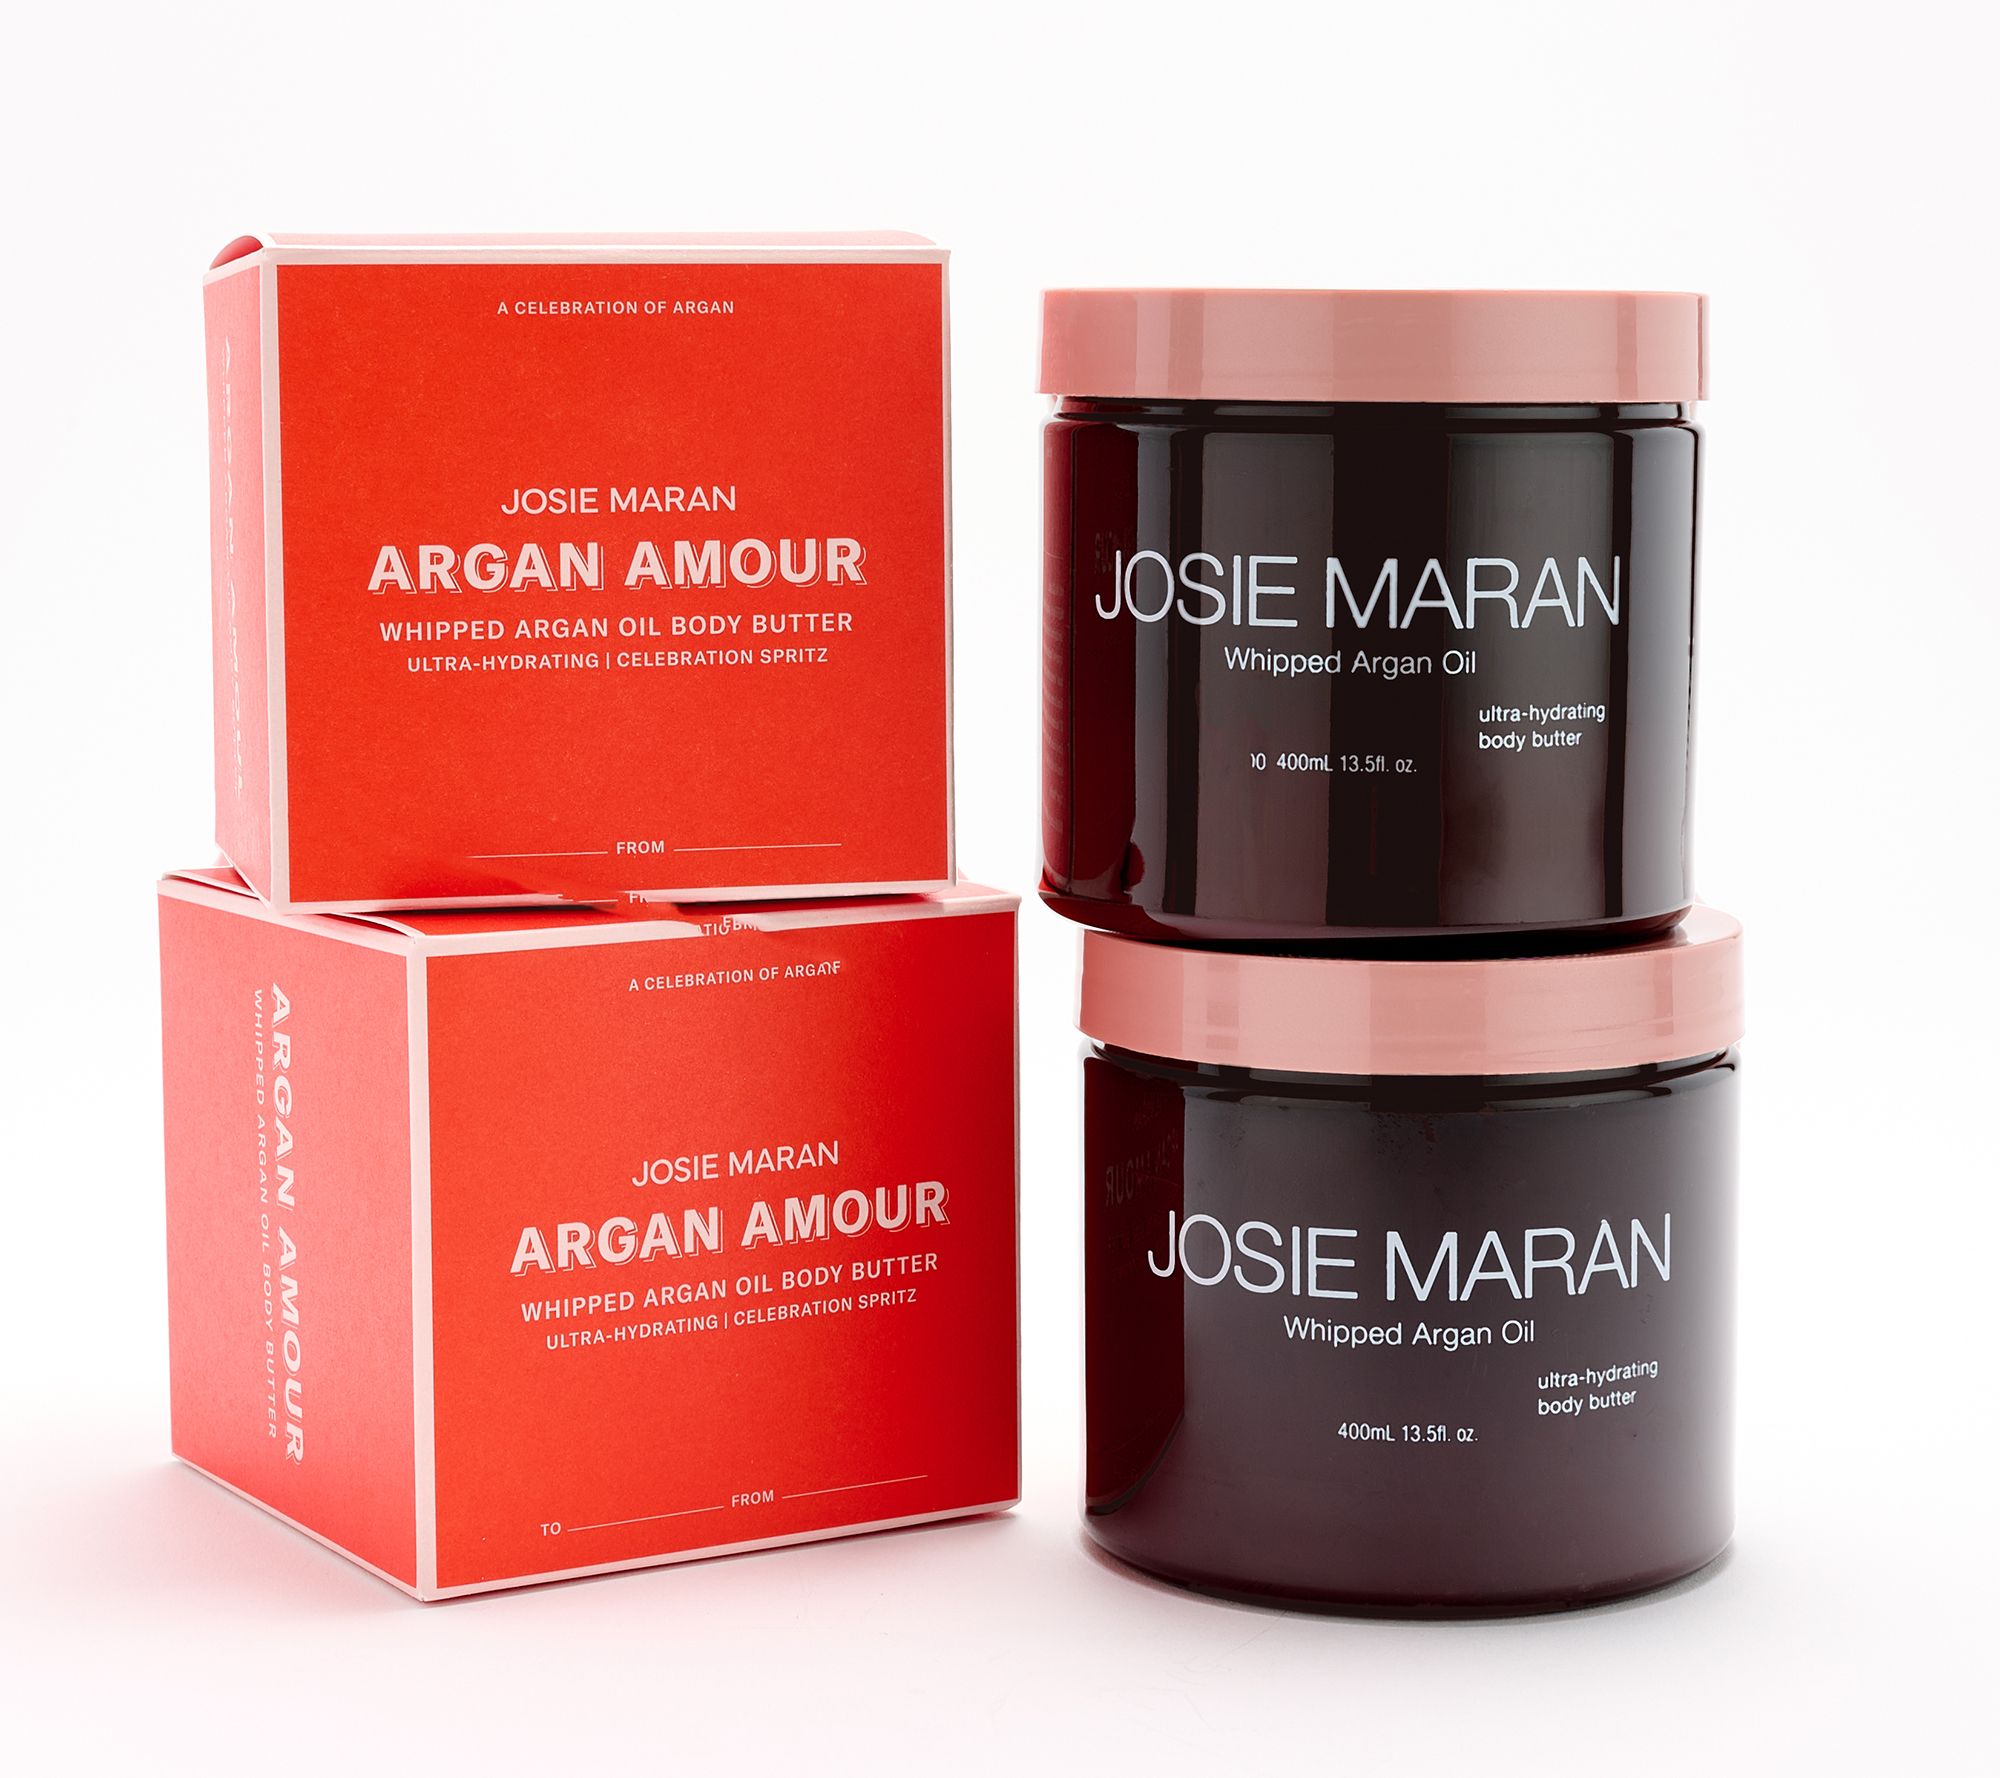 Josie Maran Spread Joy Whipped Argan Body Butter Duo with Gift Boxes